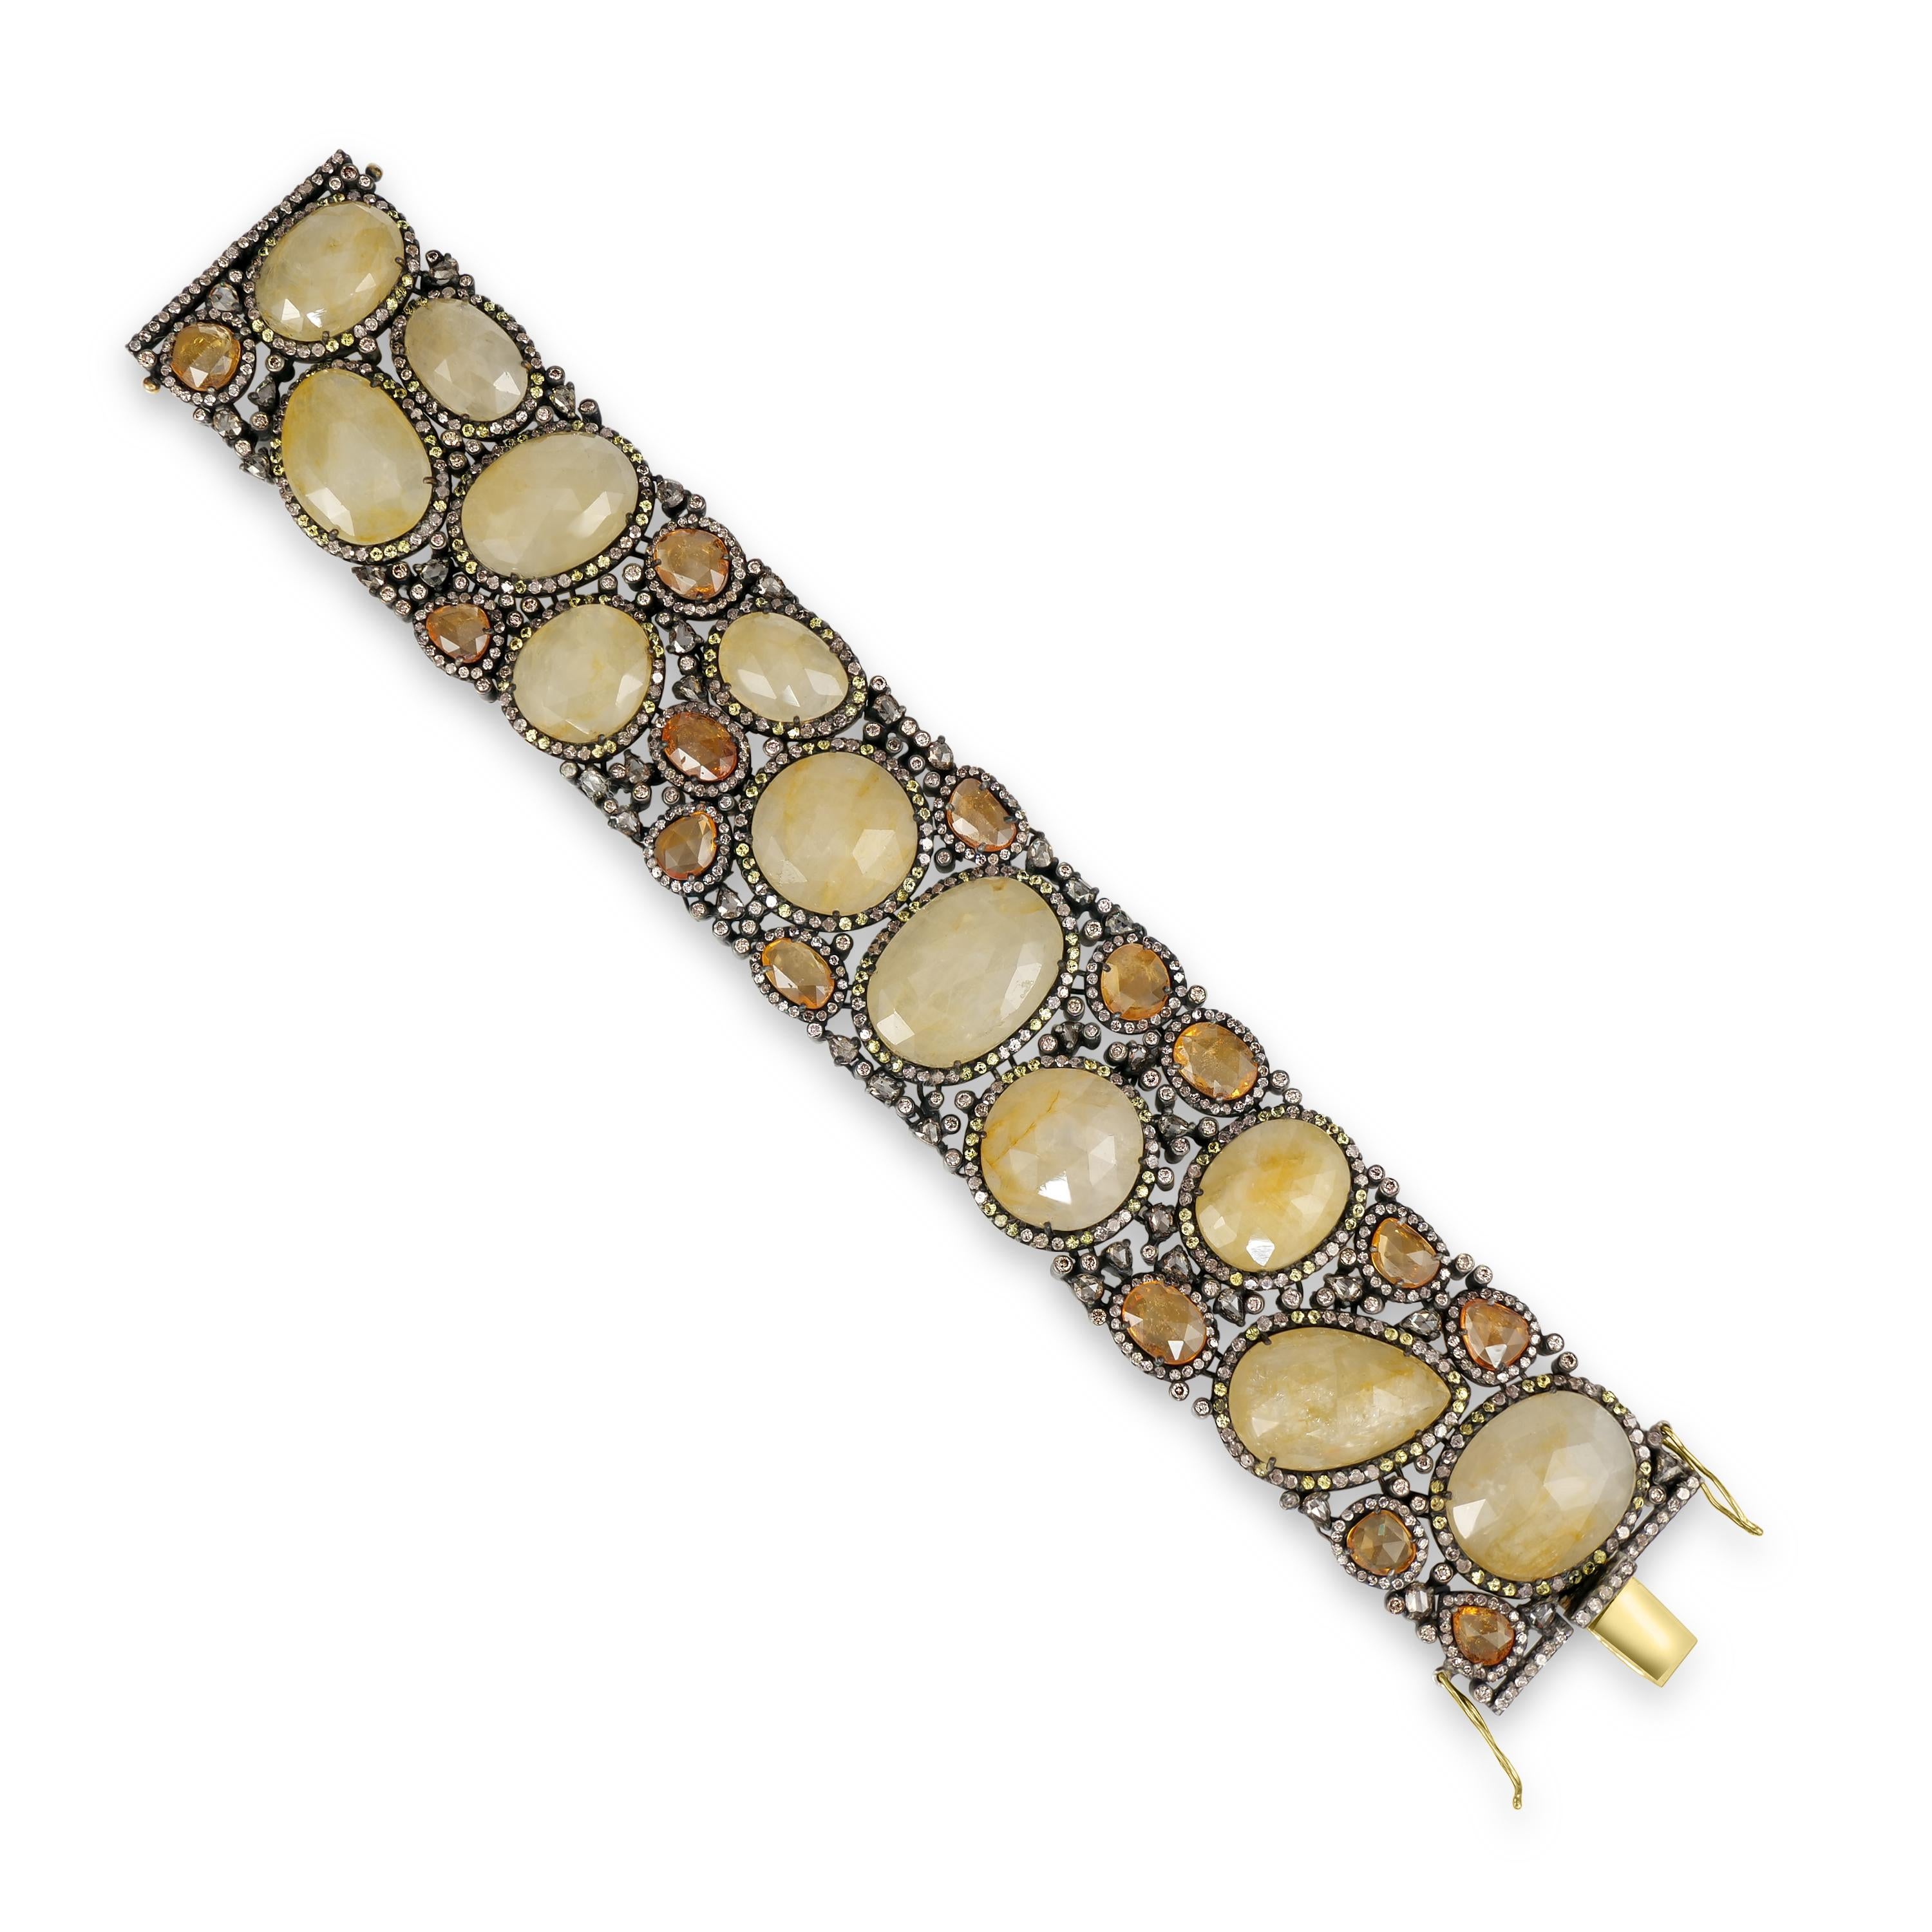 Behold the splendor of the Victorian era with this magnificent 135 Cttw. Sapphire and Diamond Open Work Bracelet. A luxurious tapestry of gemstones, this bracelet is a celebration of opulence and artistry. Large oval, round, and pear-shaped